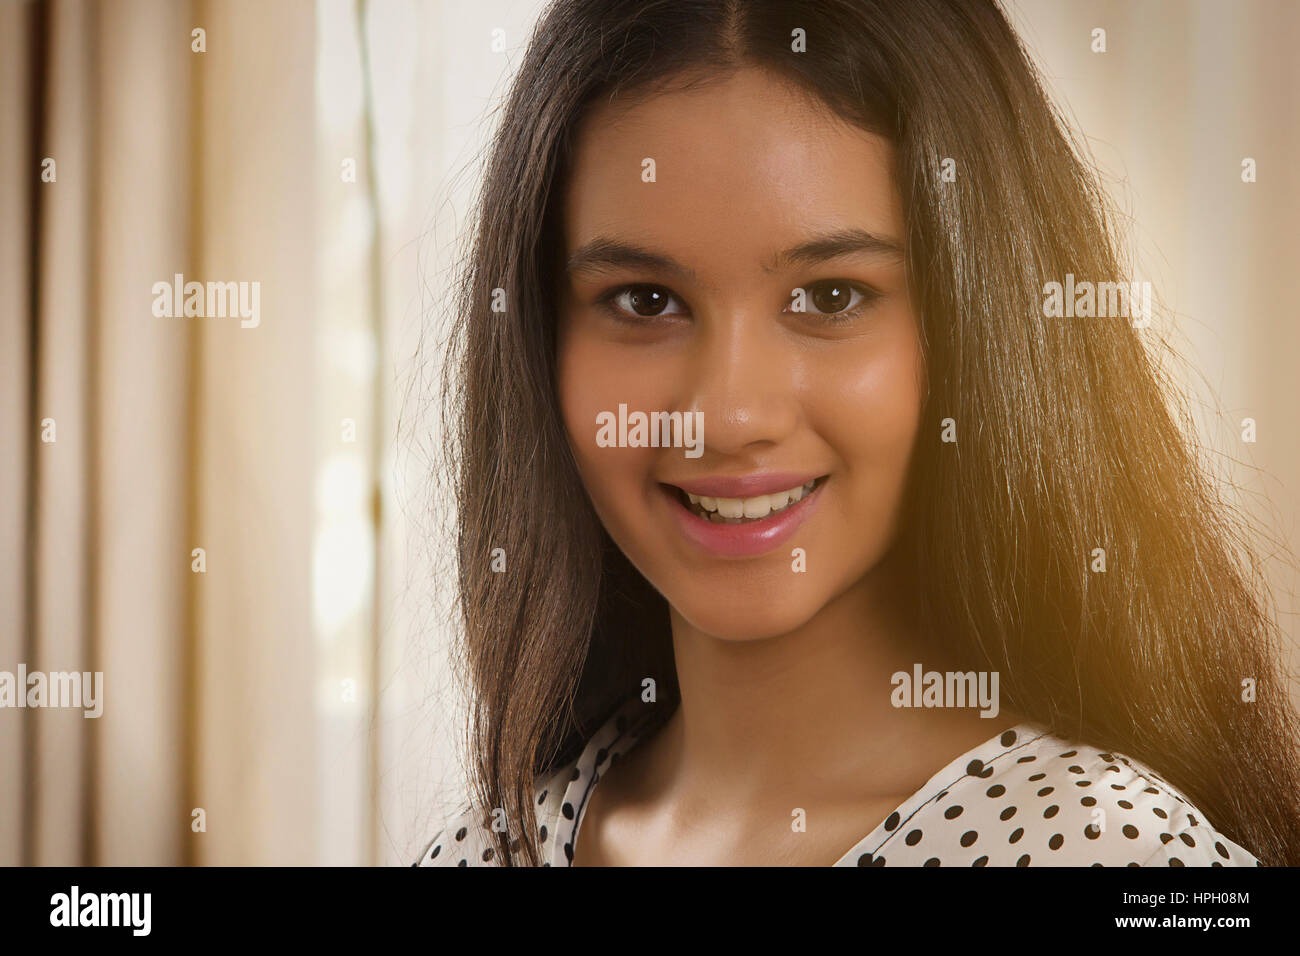 Close up portrait of teenage girl face Stock Photo